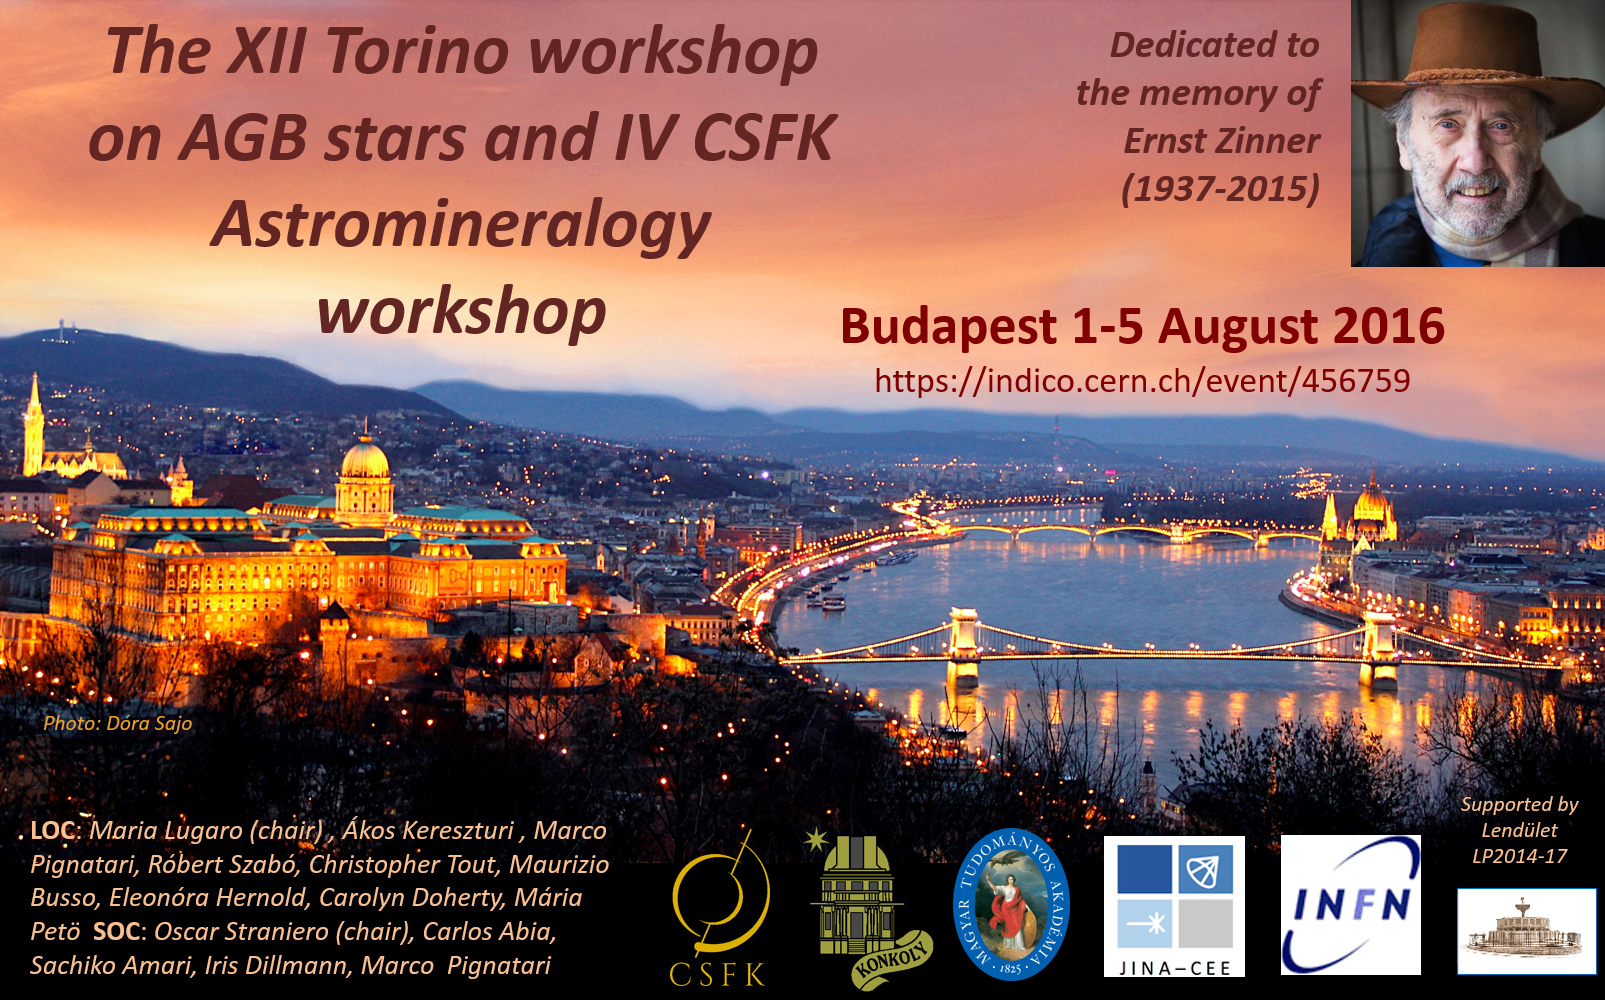 The XII Torino workshop on asymptotic giant branch stars: evolution, nucleosynthesis, observations, and the impact on cosmochemistry and The IV CSFK Astromineralogy workshop

